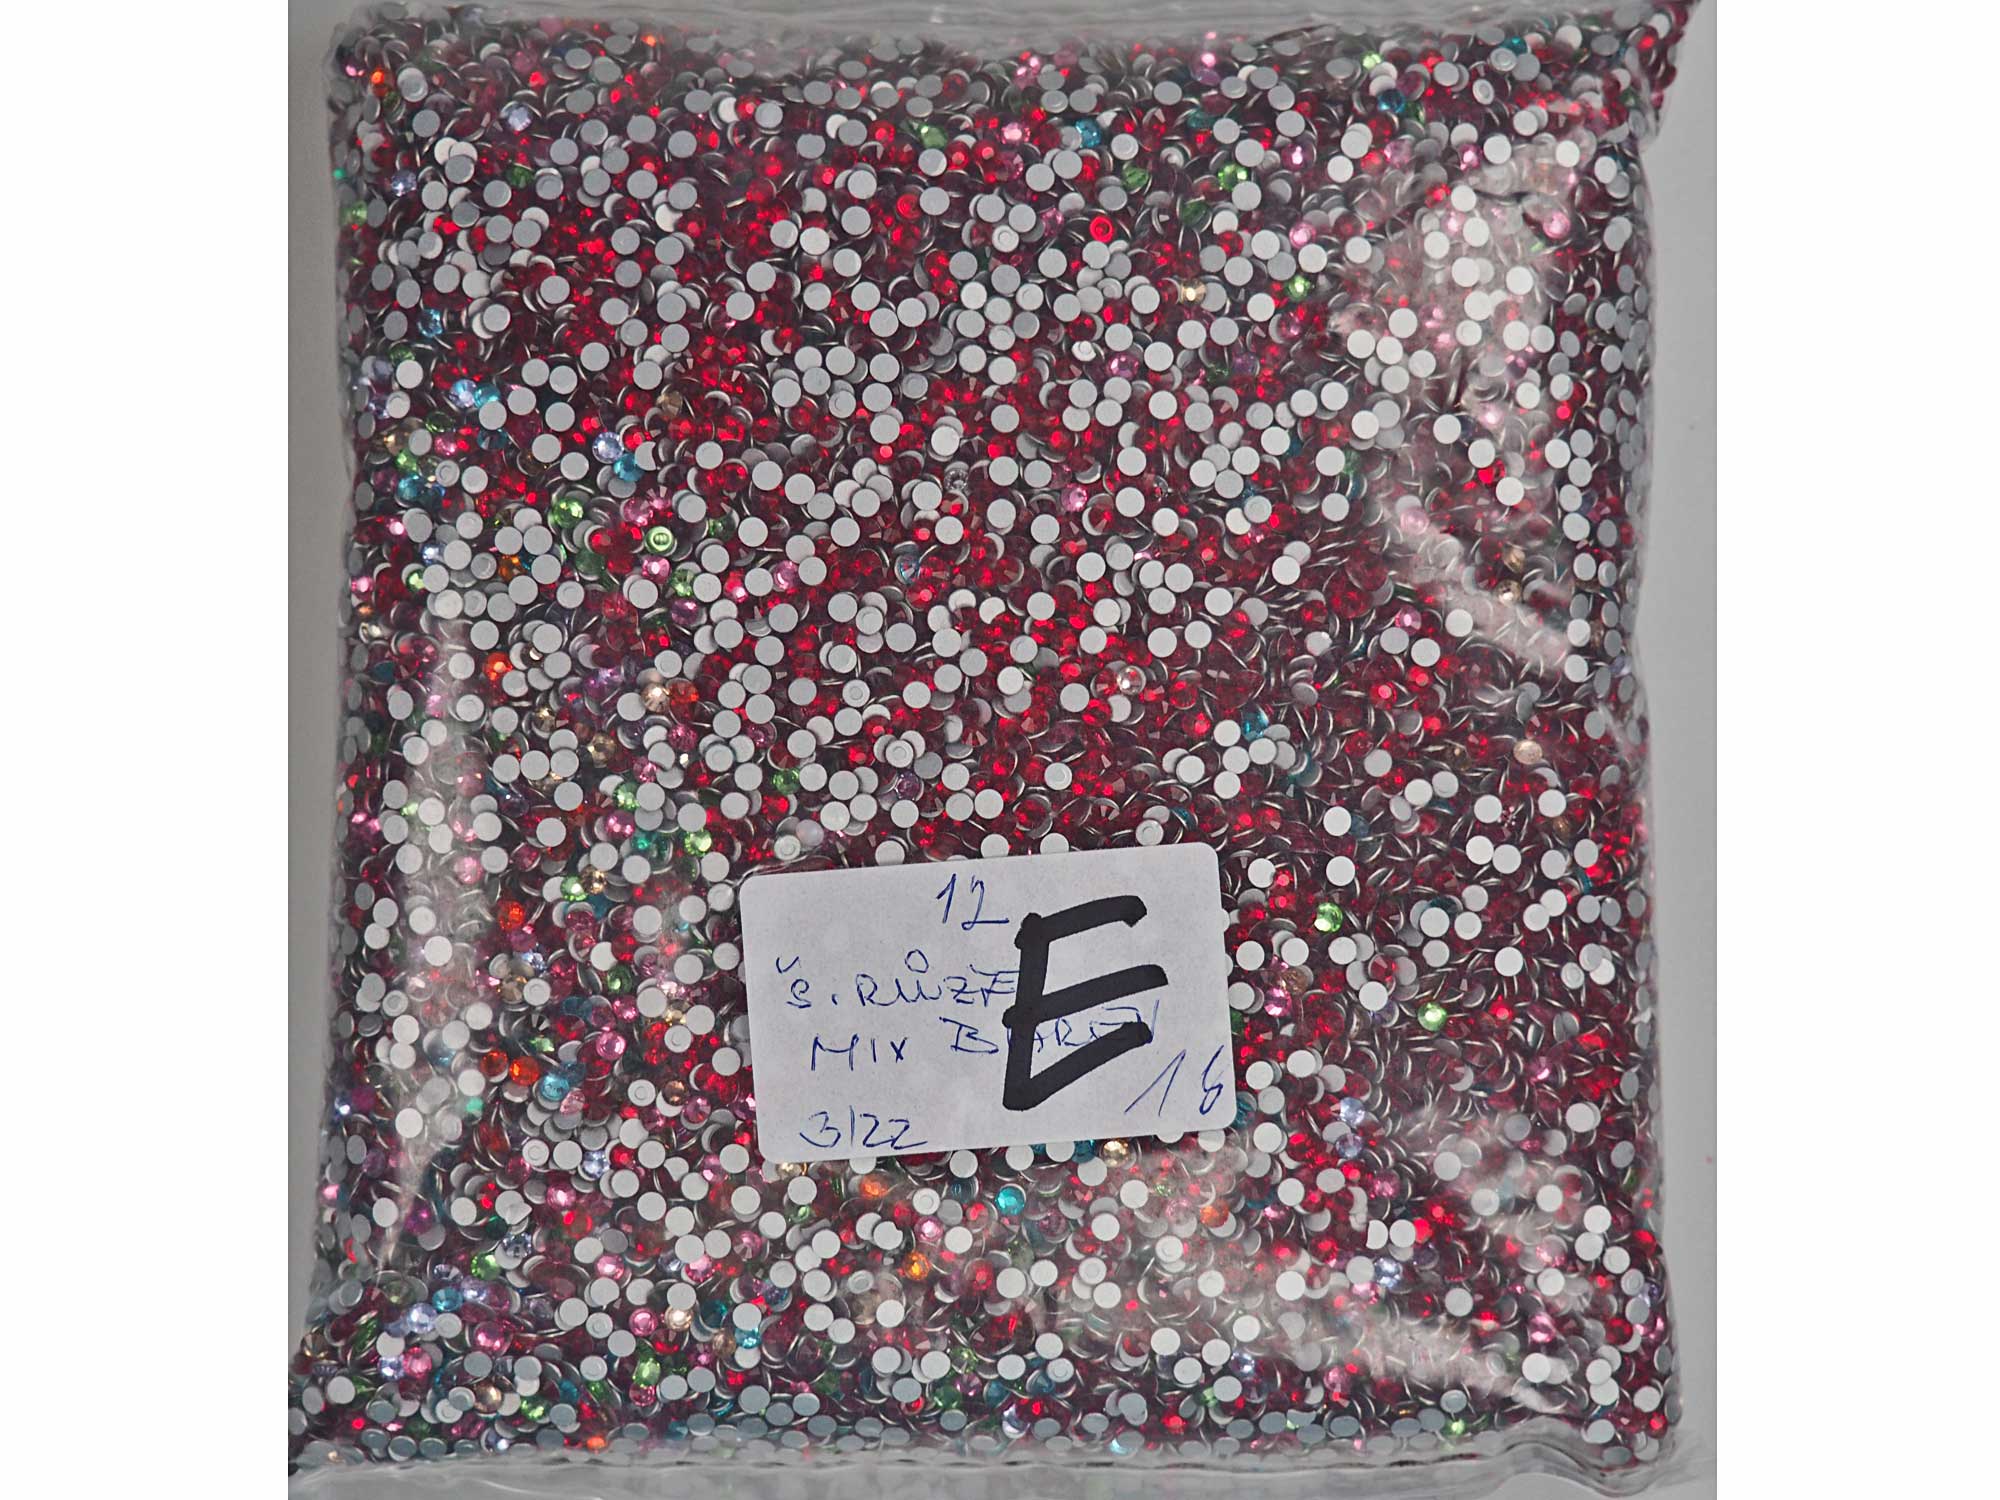 Mix Color "E" CLOSEOUT, ss12, 10grams of Preciosa VIVA Chaton Roses (Rhinestone Flatbacks), Genuine Czech Crystals, nail art BY THE WEIGHT